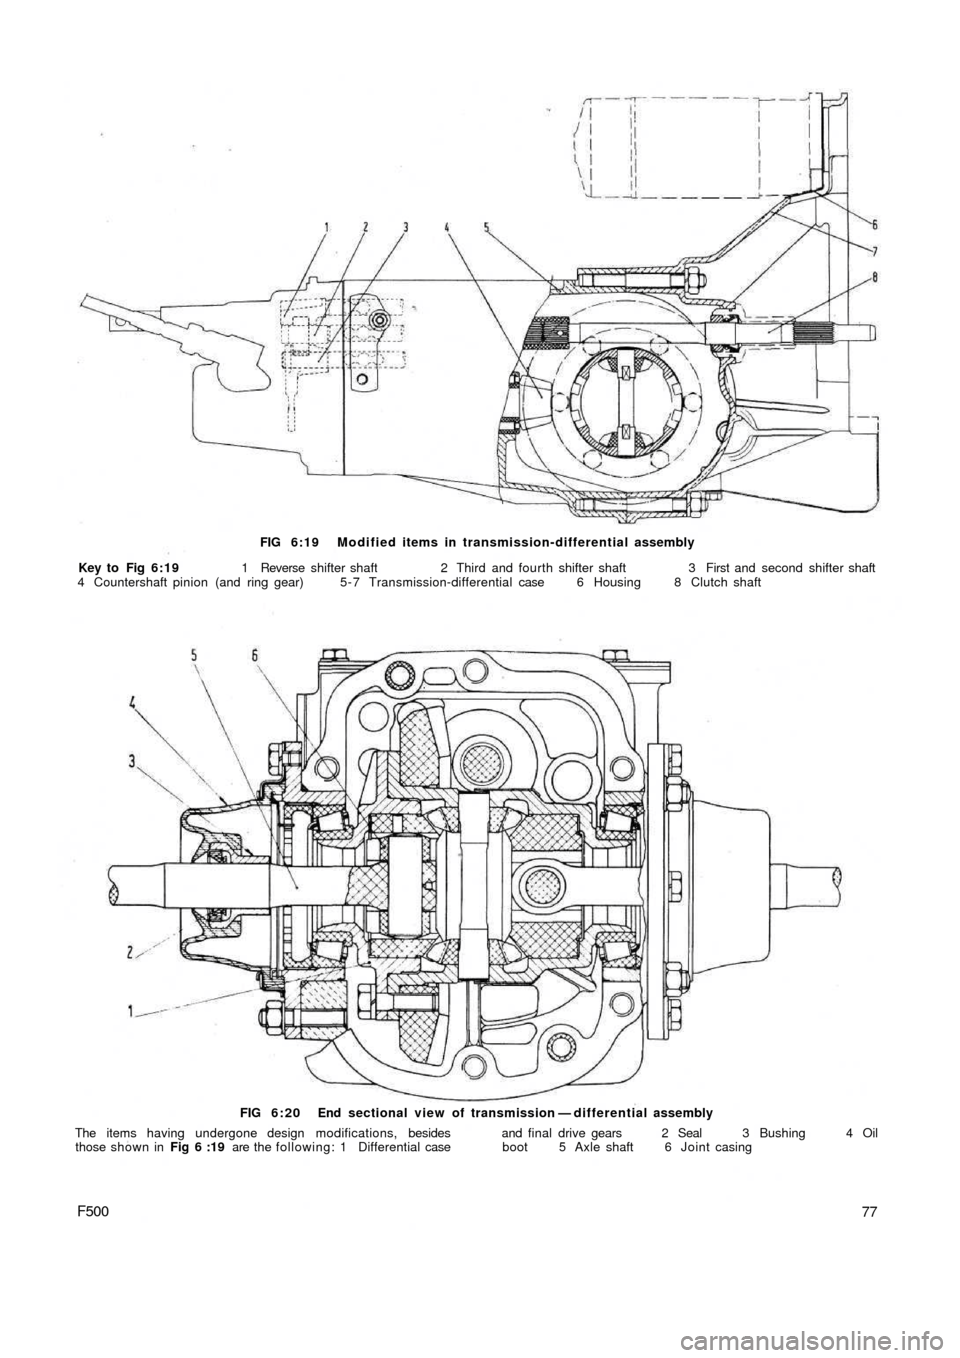 FIAT 500 1970 1.G Workshop Manual FIG 6:19 Modified items in transmission-differential assembly
Key to  Fig  6:19 1 Reverse shifter shaft  2 Third and fourth shifter shaft  3 First and second shifter shaft
4 Countershaft pinion (and r